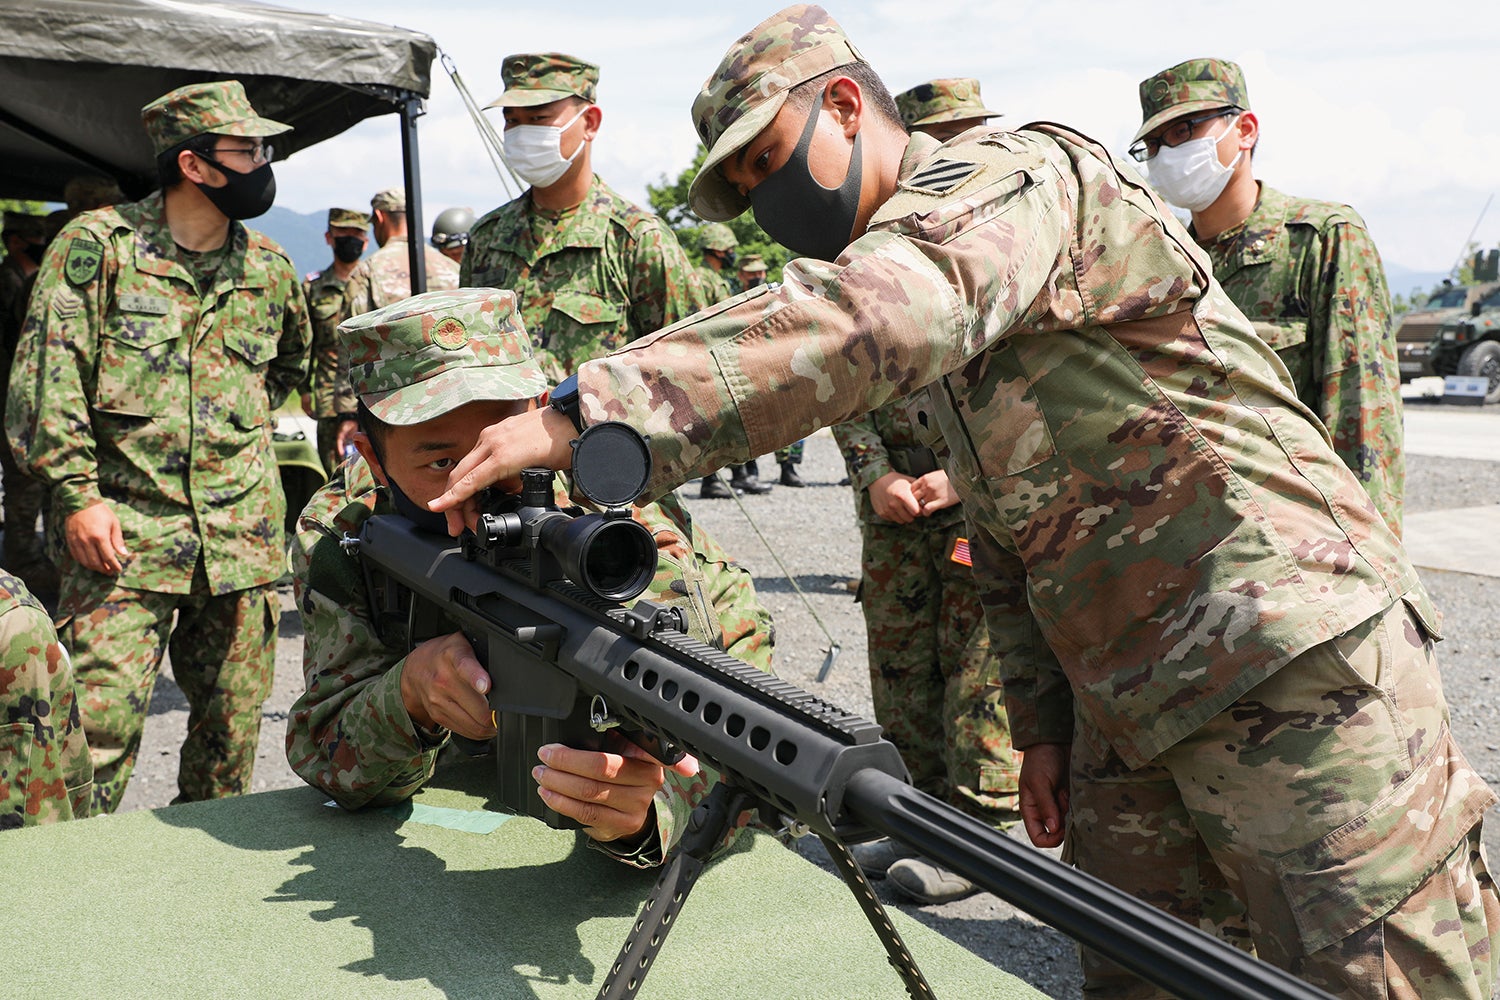 Spc. Gary Guijarro, with the 3rd Infantry Division, shows a Japan Ground Self-Defense Force member the optics on his rifle at Aibano Training Area, Japan. (Credit: U.S. Army/Pfc. Anthony Ford)